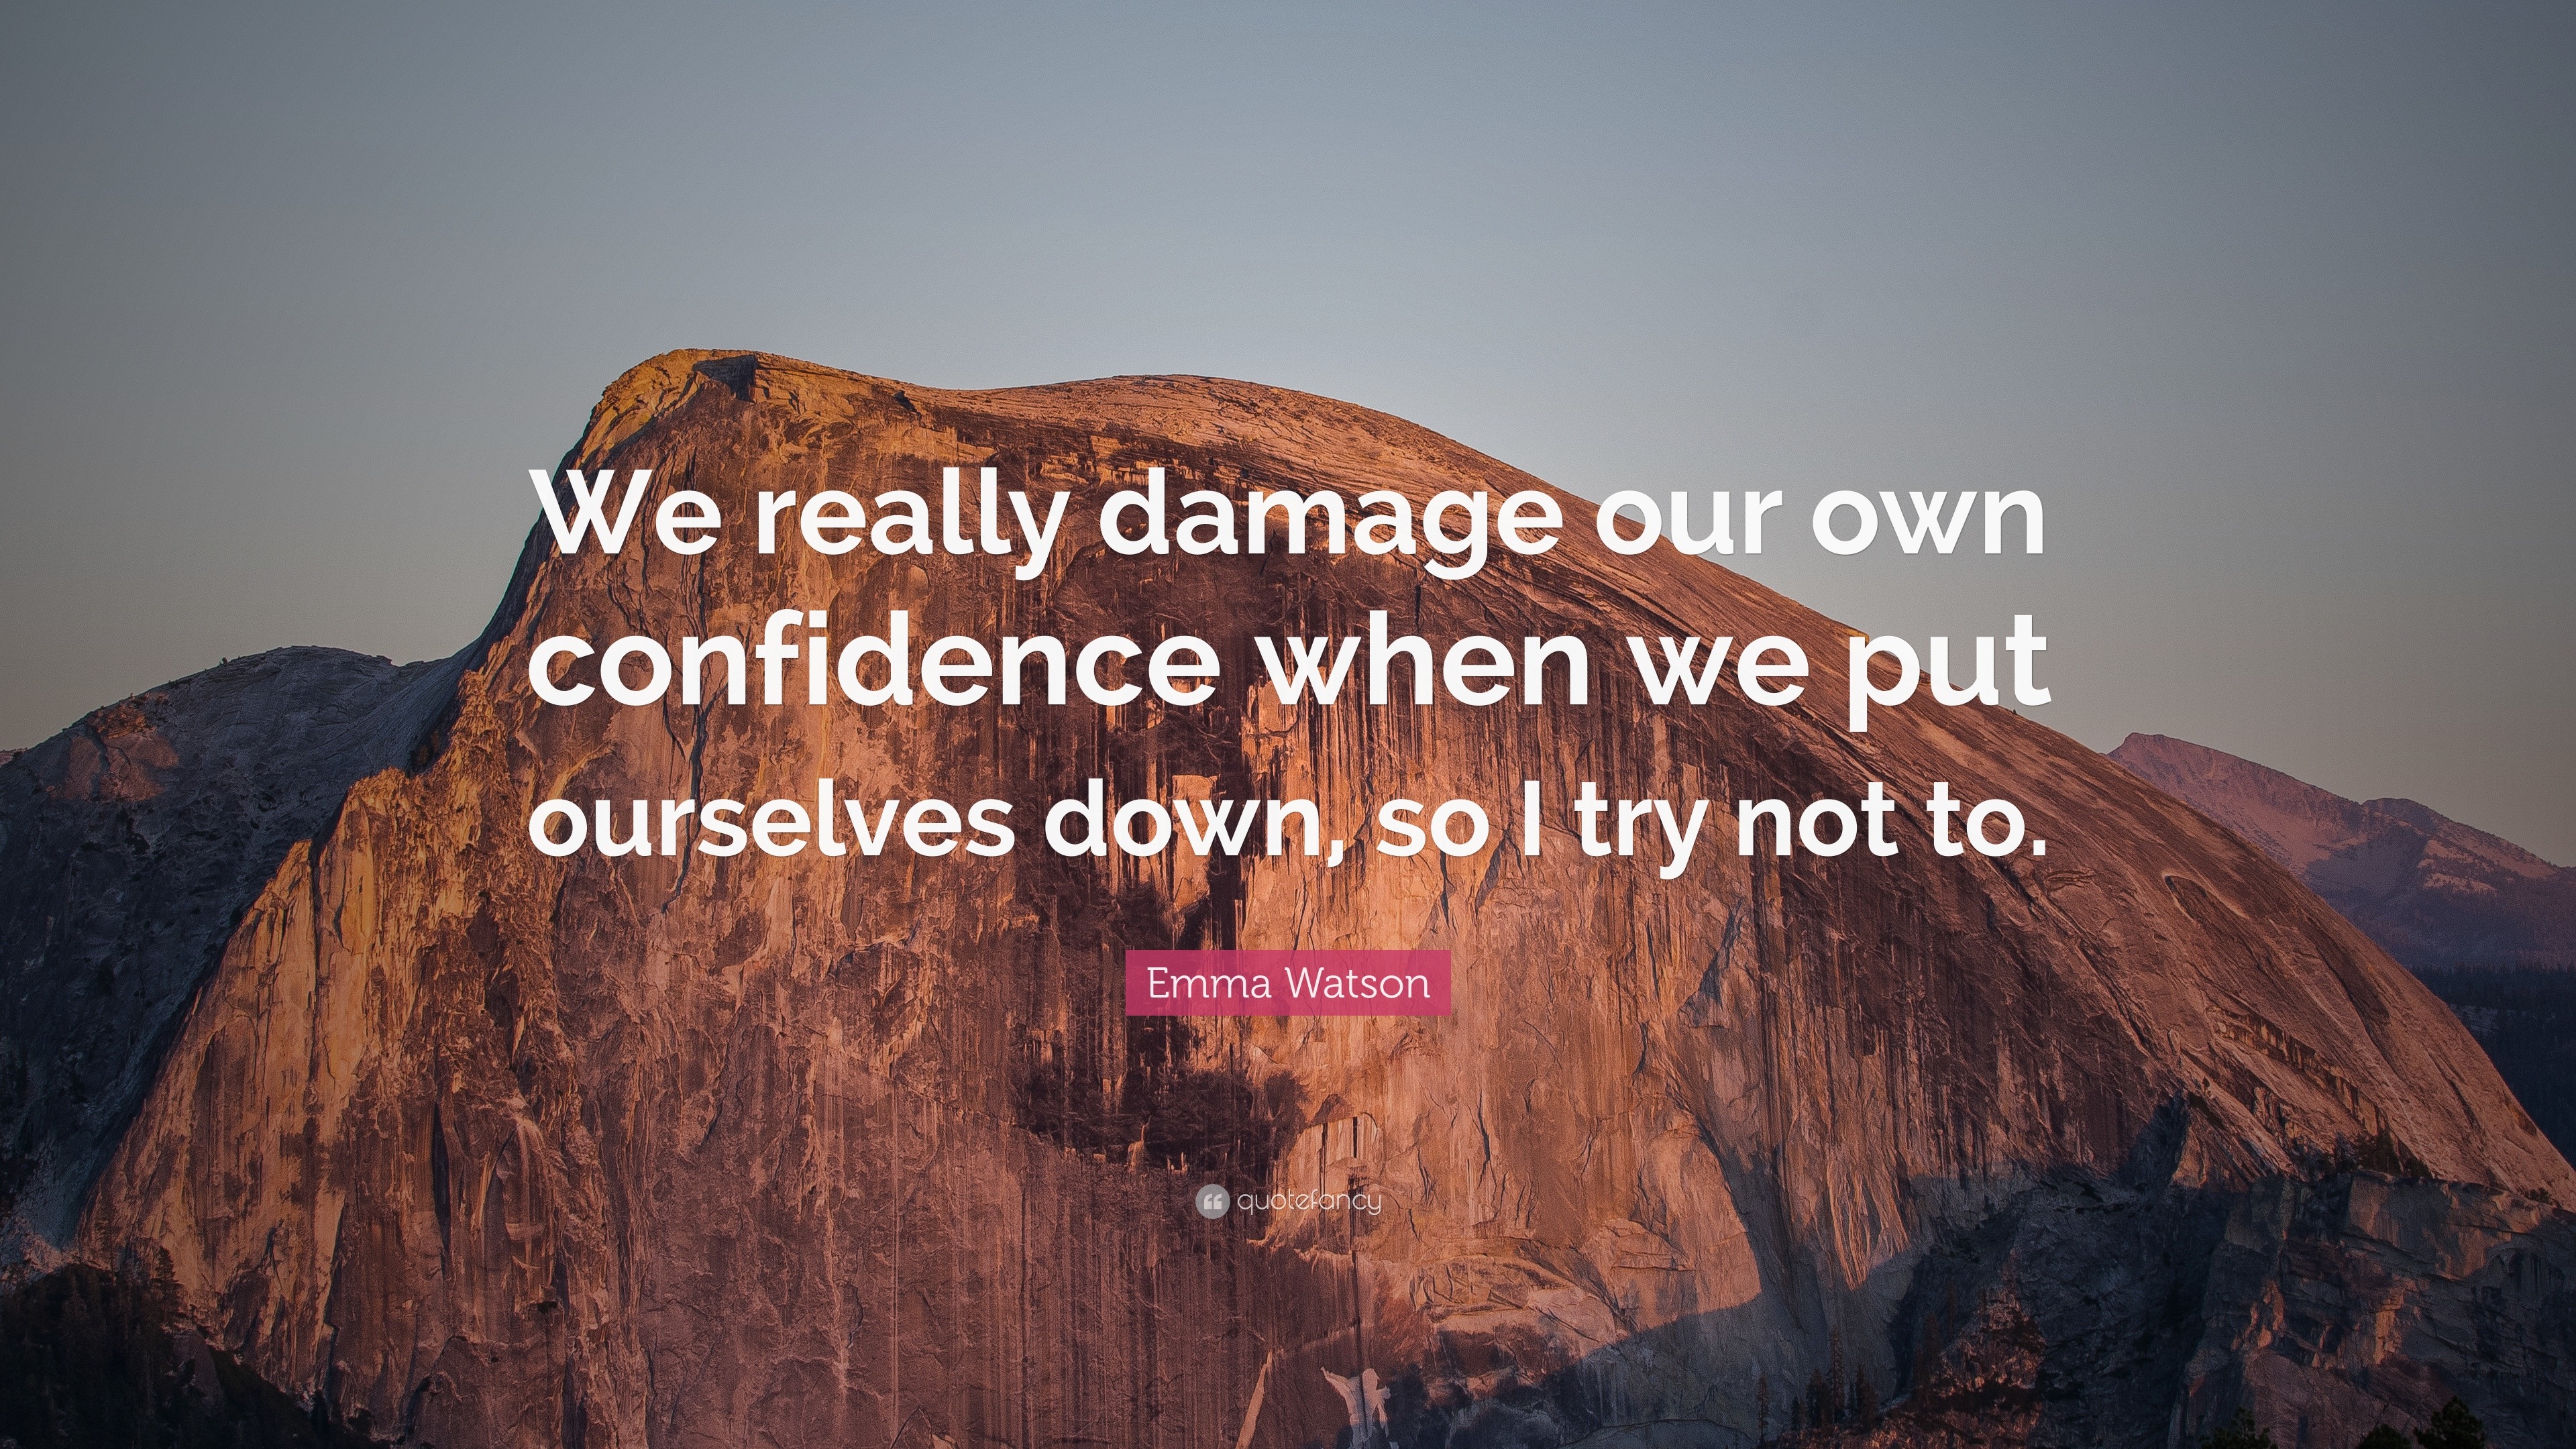 Emma Watson Quote: “We really damage our own confidence when we put ...